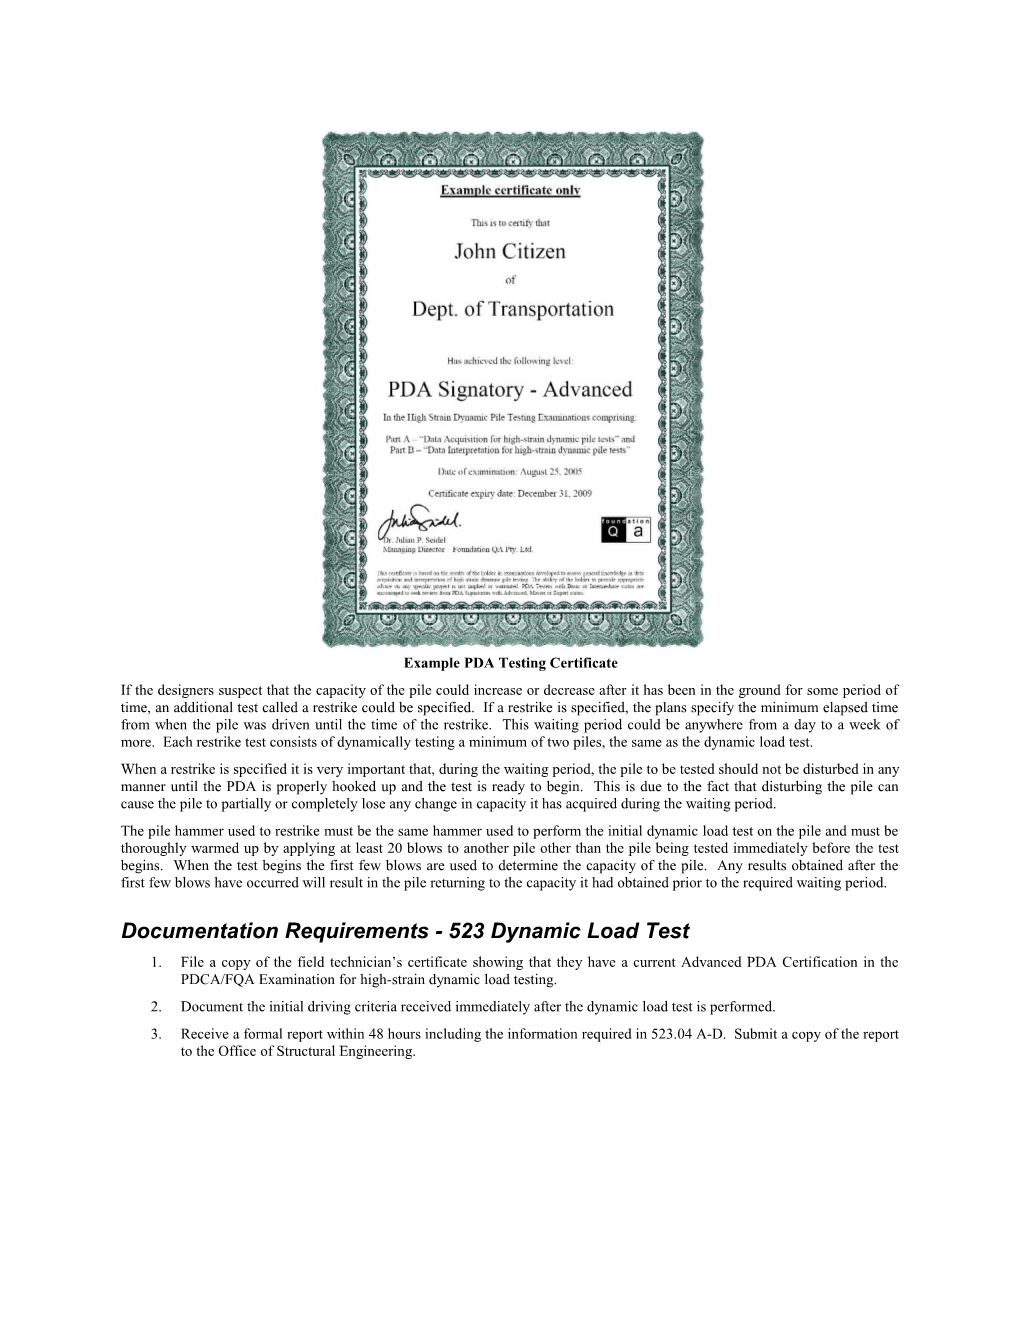 Documentation Requirements 523 Dynamic Load Test